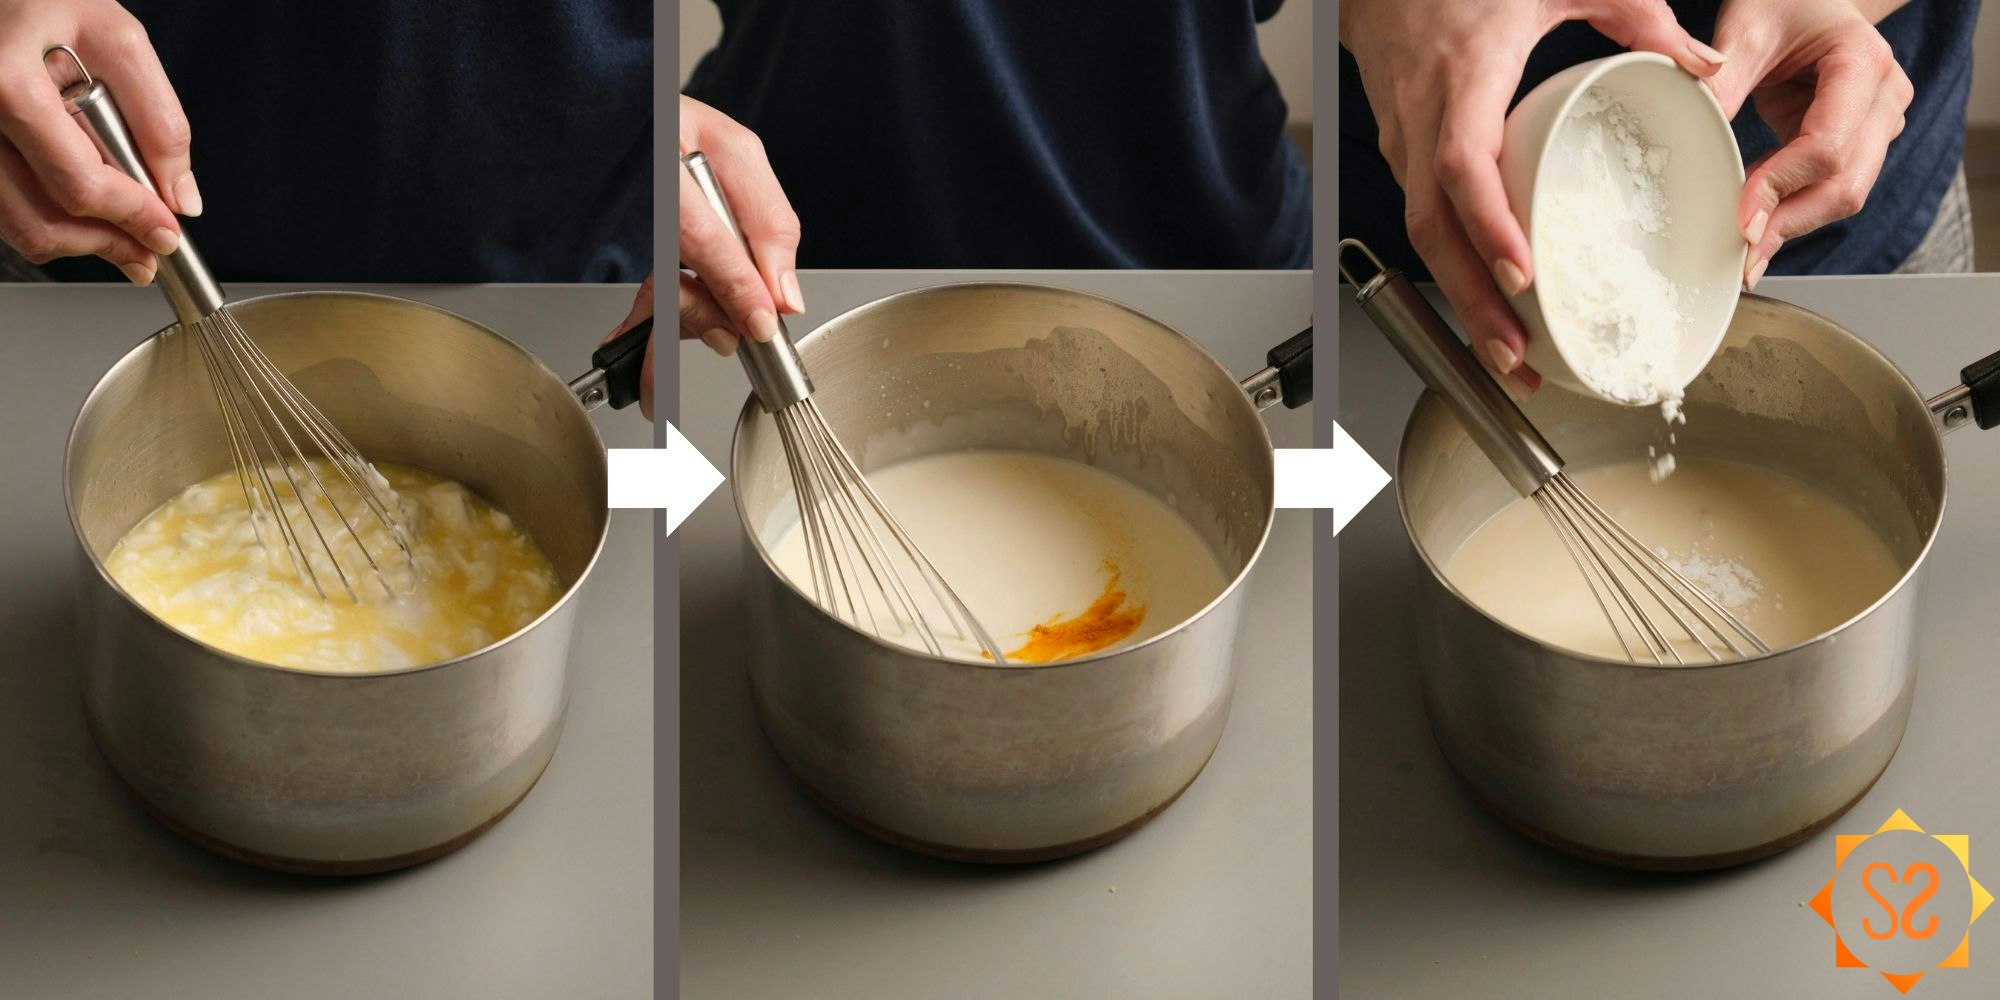 Three images showing mixing the ingredients of the Key lime filling in a saucepan.